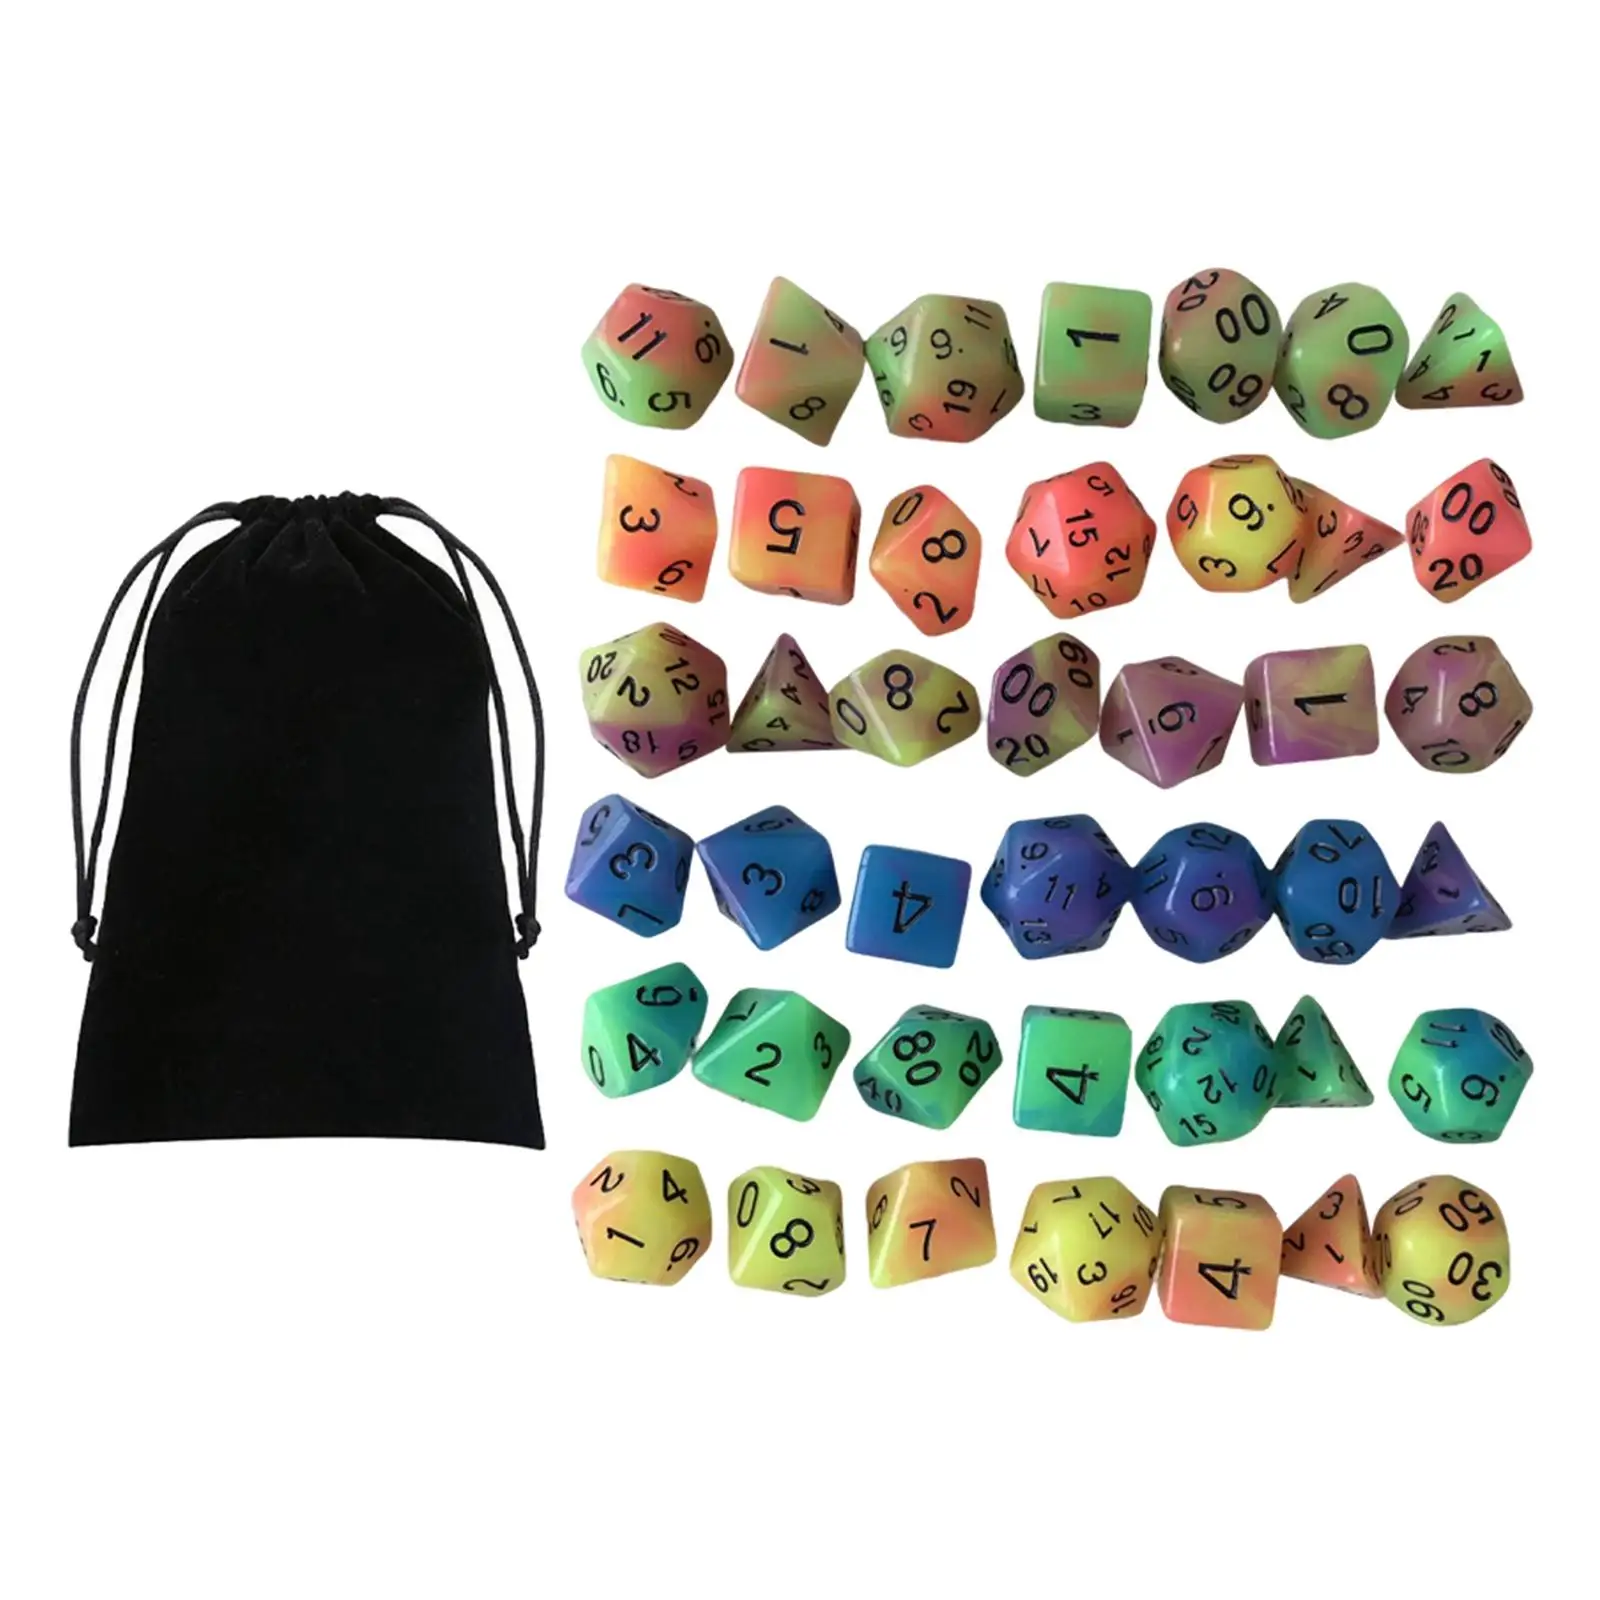 Acrylic Luminous RPG Dices Set with Pouch Bar Toys,D4-D20 Glowing Polyhedral Dices Set for MTG RPG Board Game Math Teaching